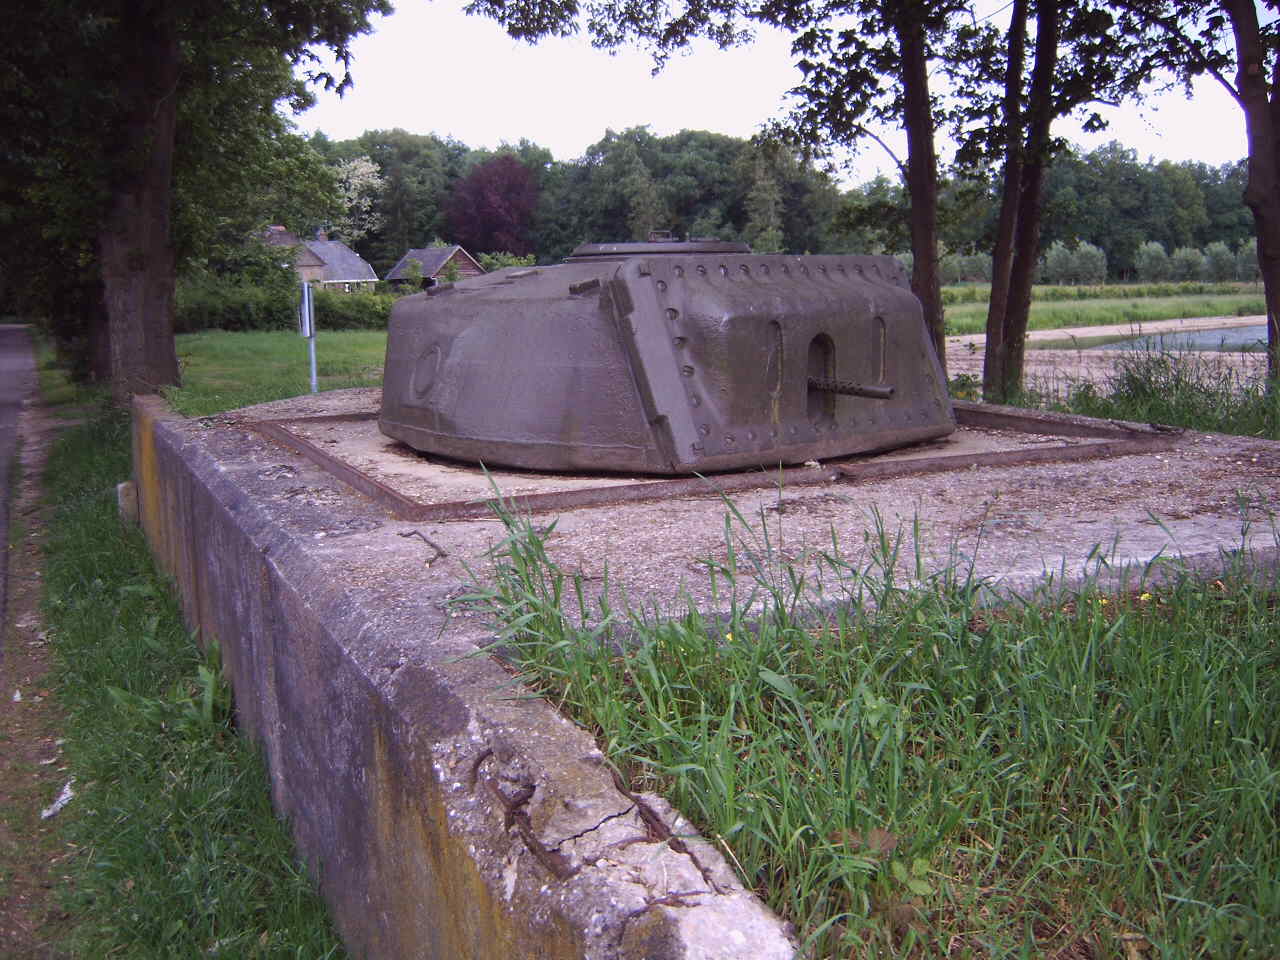 Dutch fortification made of concrete-enclosed Ram cruiser tank, east of the IJssel River, near Olst, the Netherlands, 4 Jun 2006